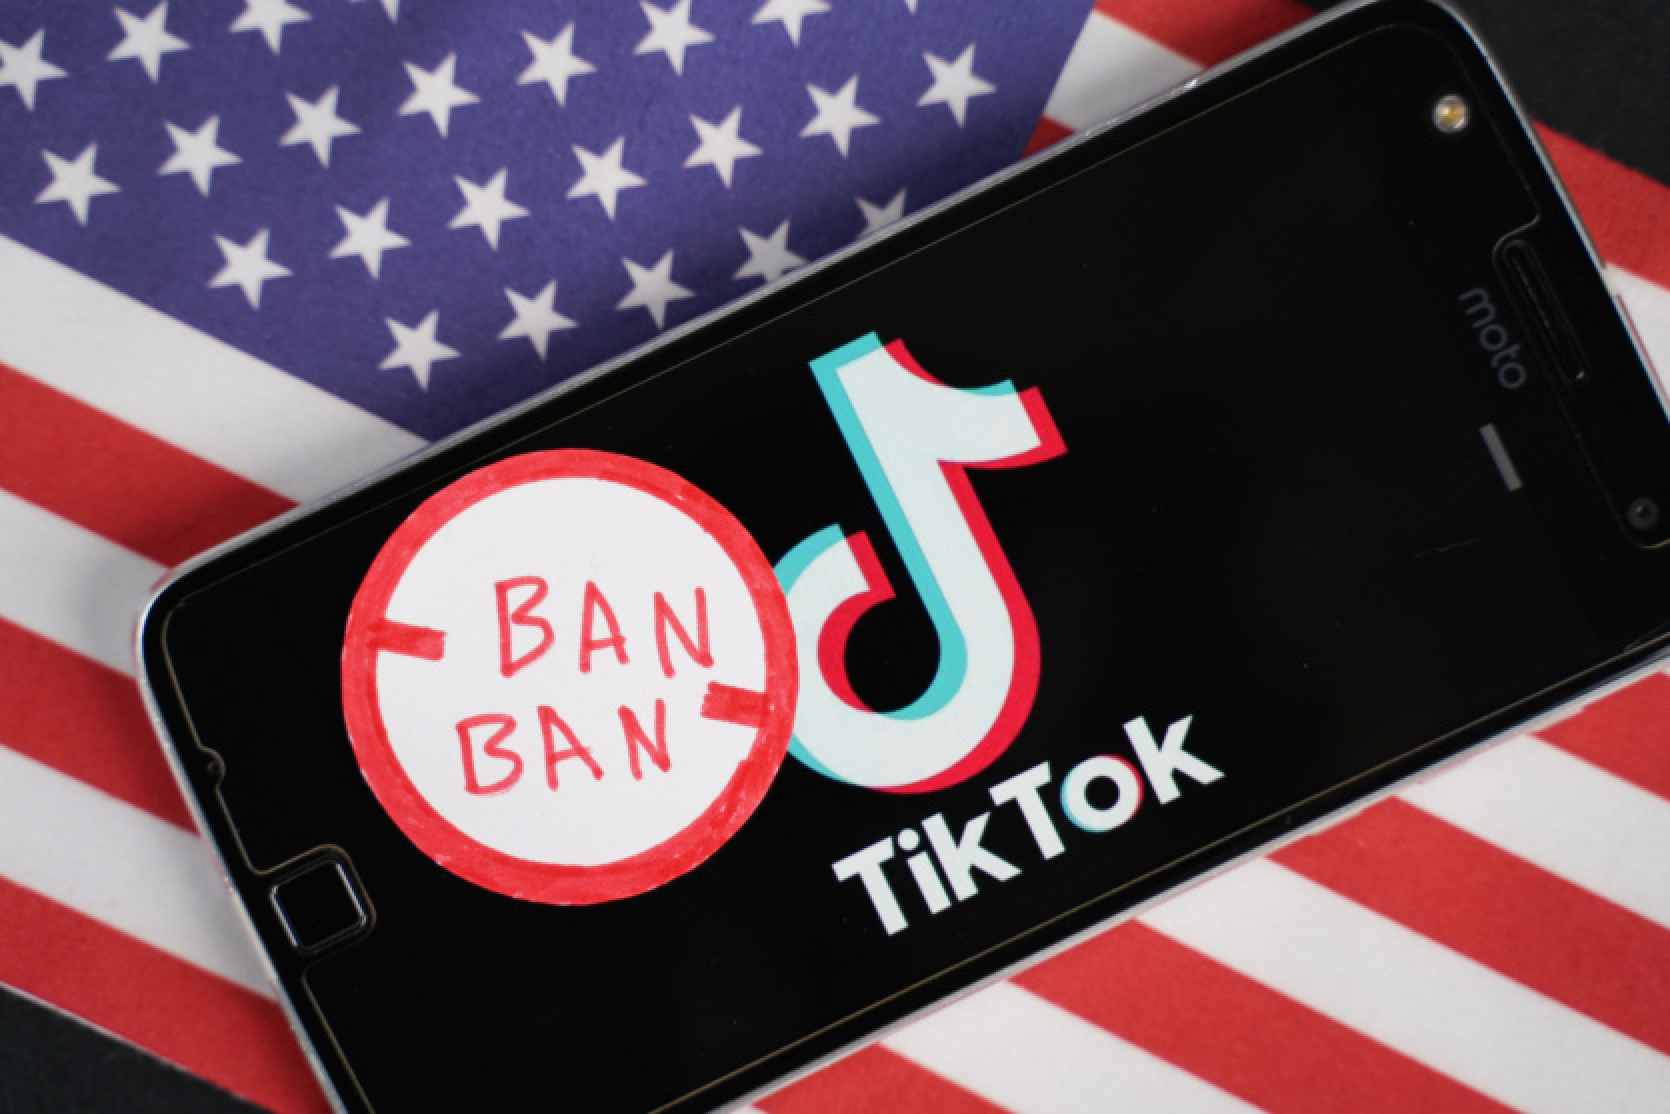 TikTok CEO urges users in the US to "defend their constitutional rights" (and the platform at the same time)